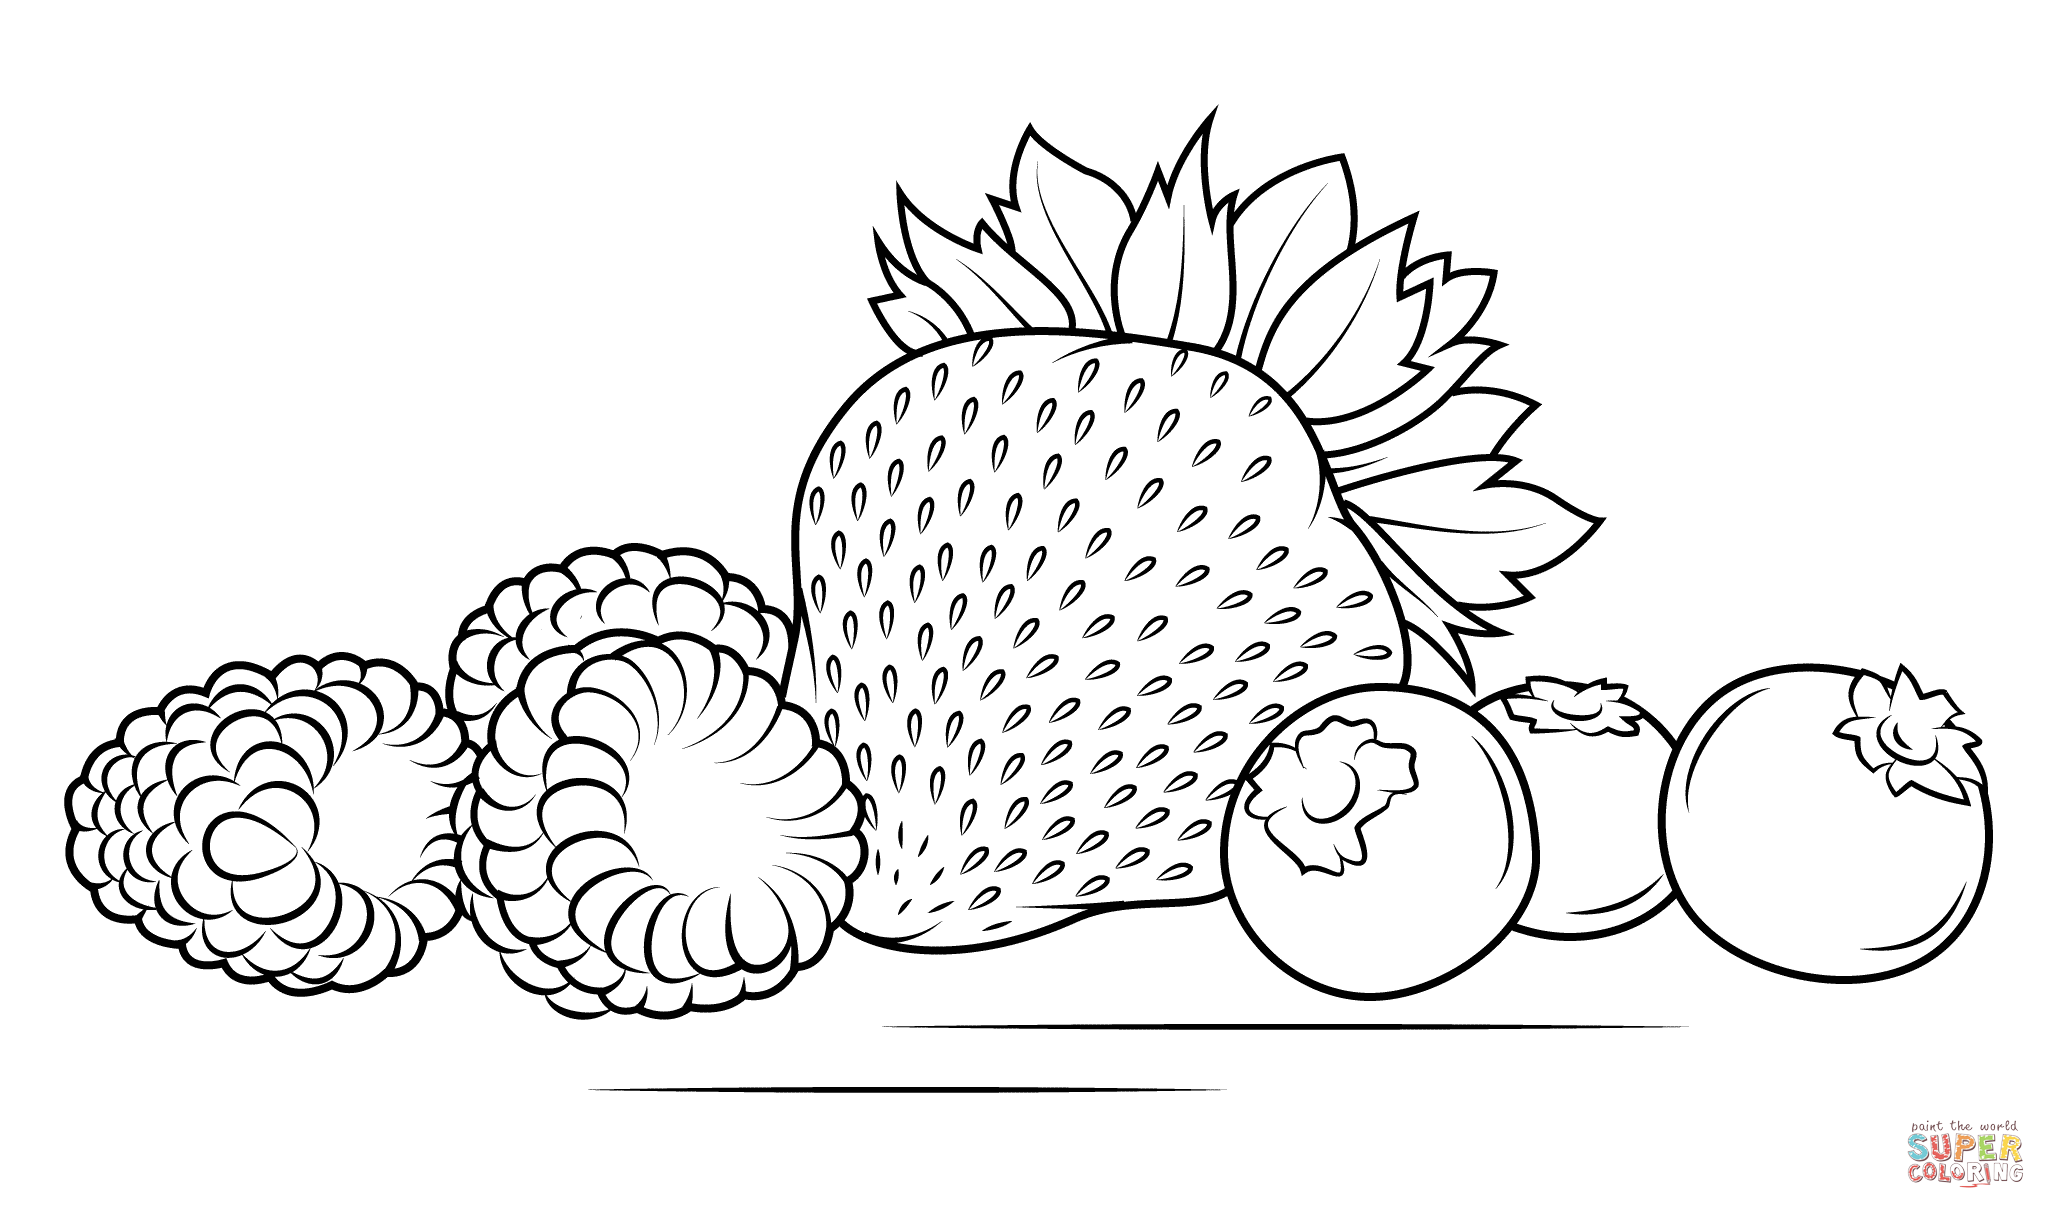 Strawberries raspberries and blueberries coloring page free printable coloring pages